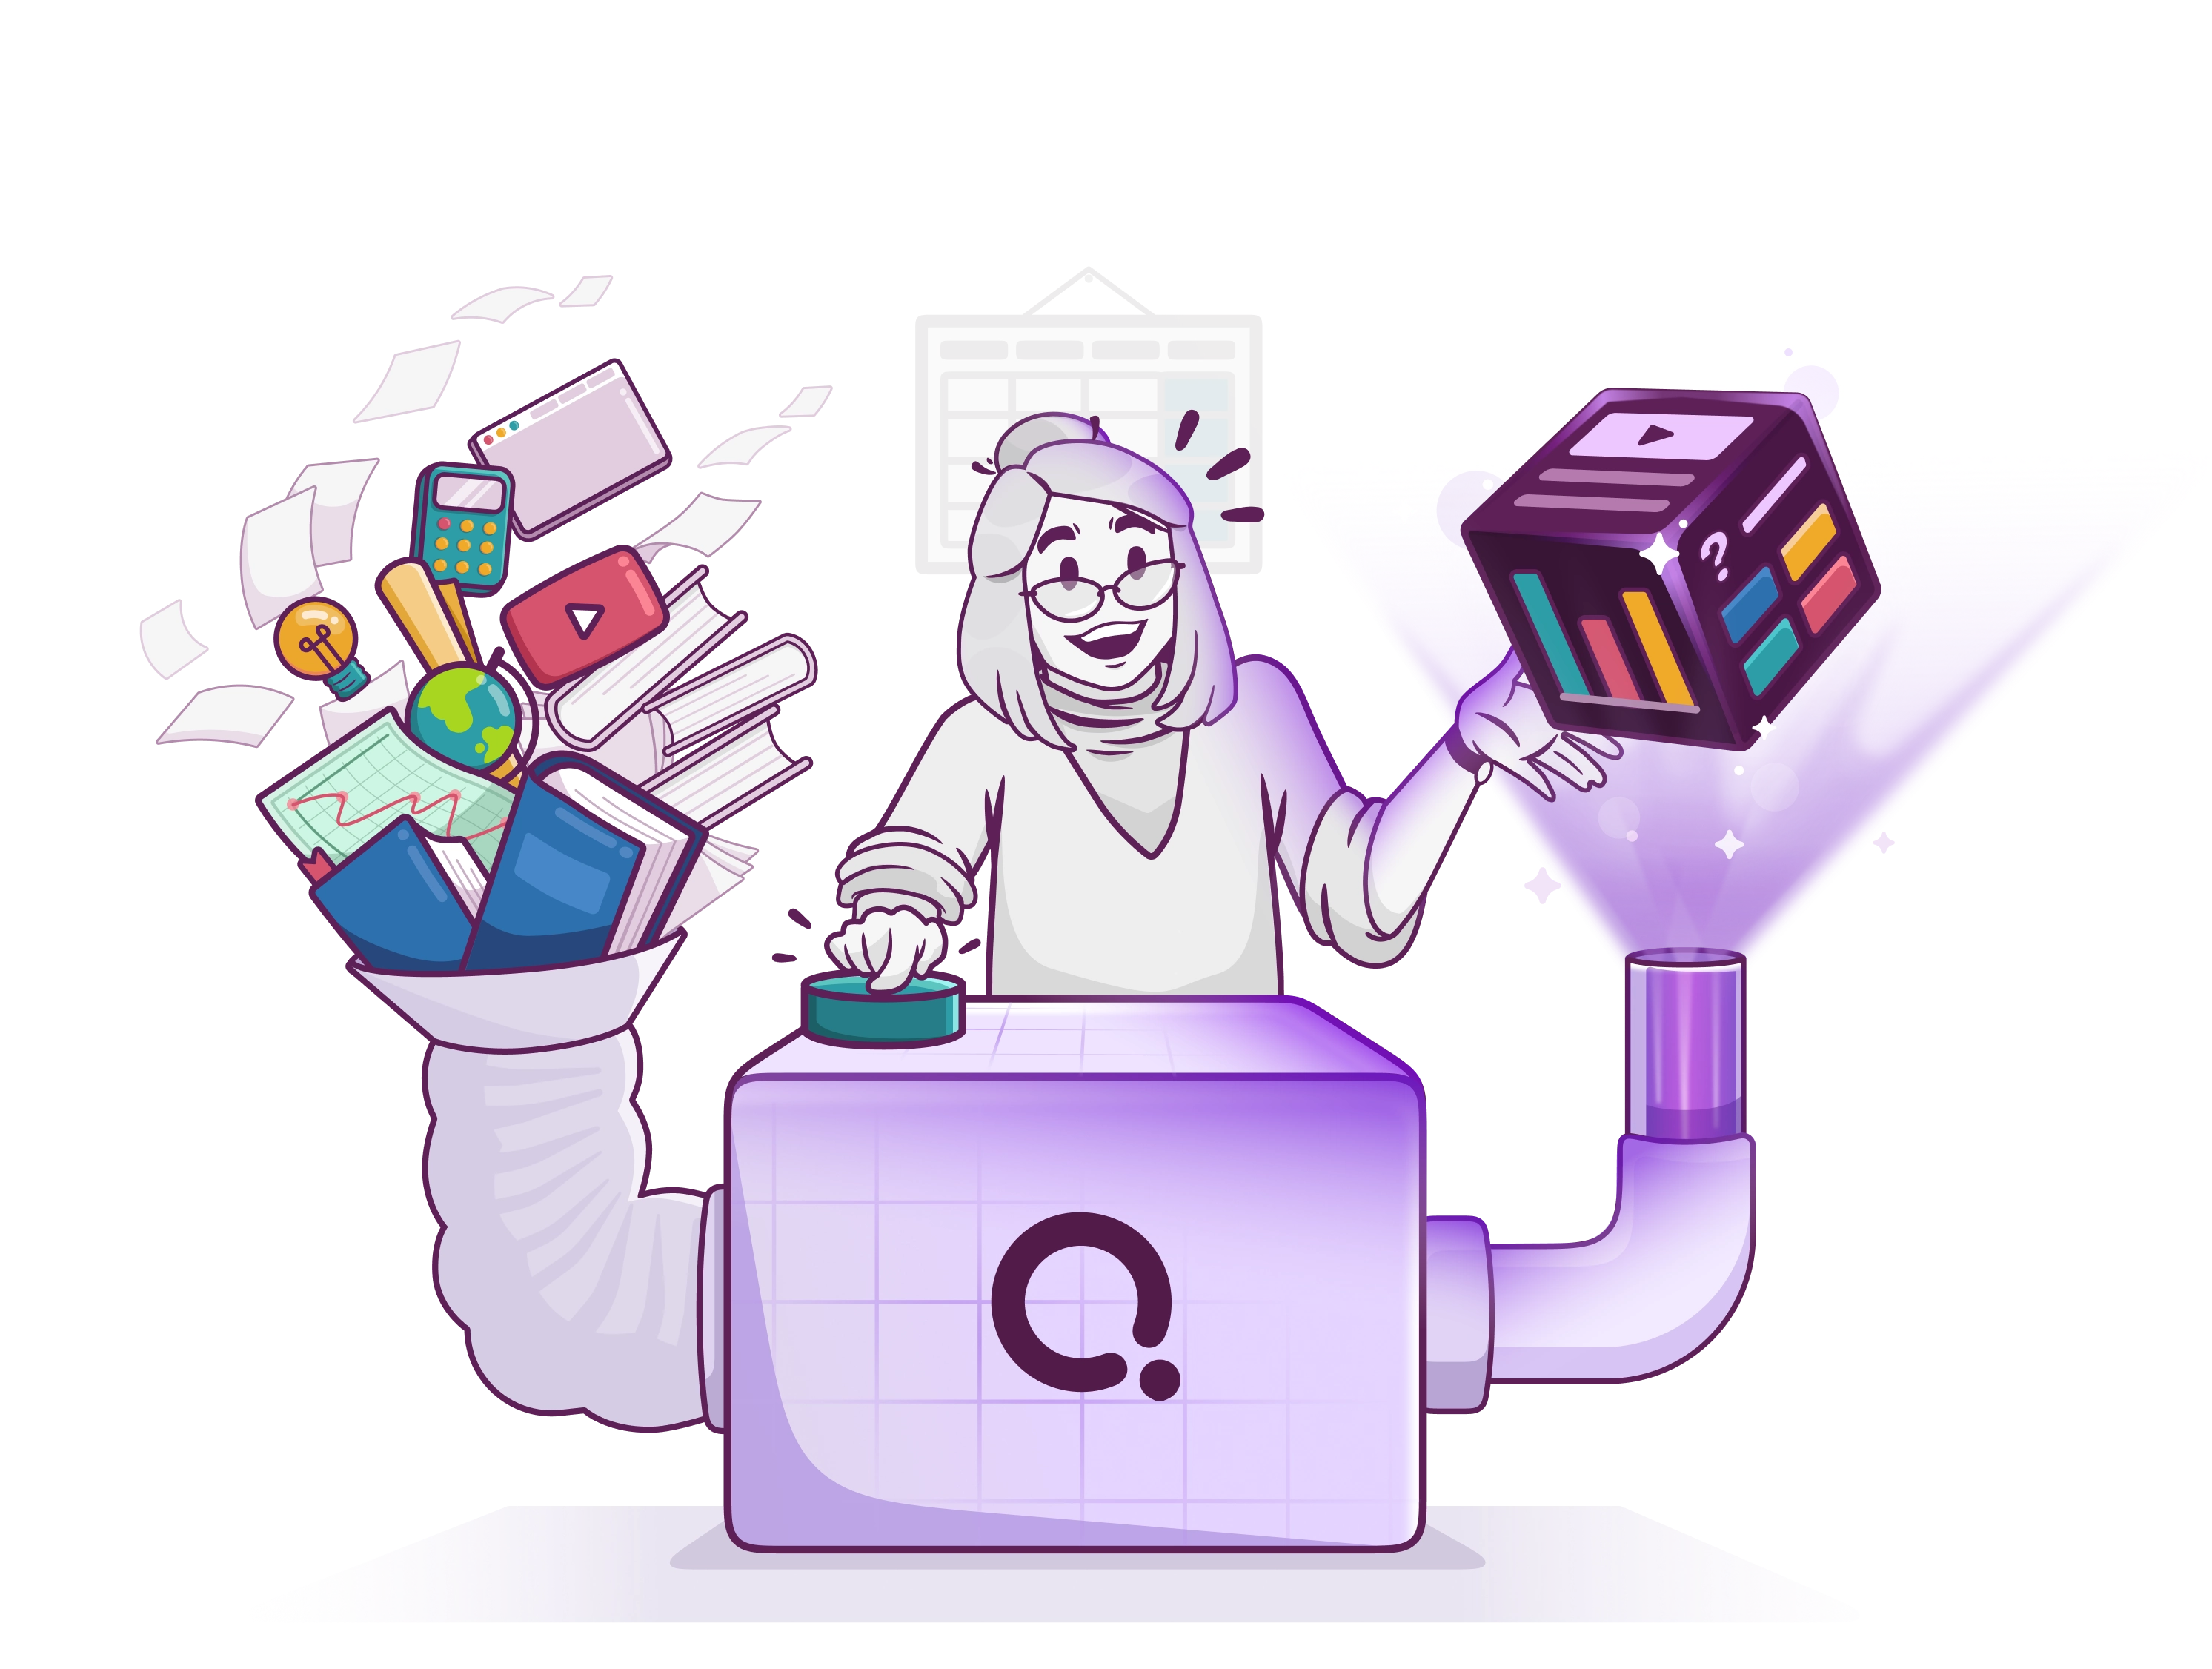 Quizizz  Free Online Quizzes, Lessons, Activities and Homework